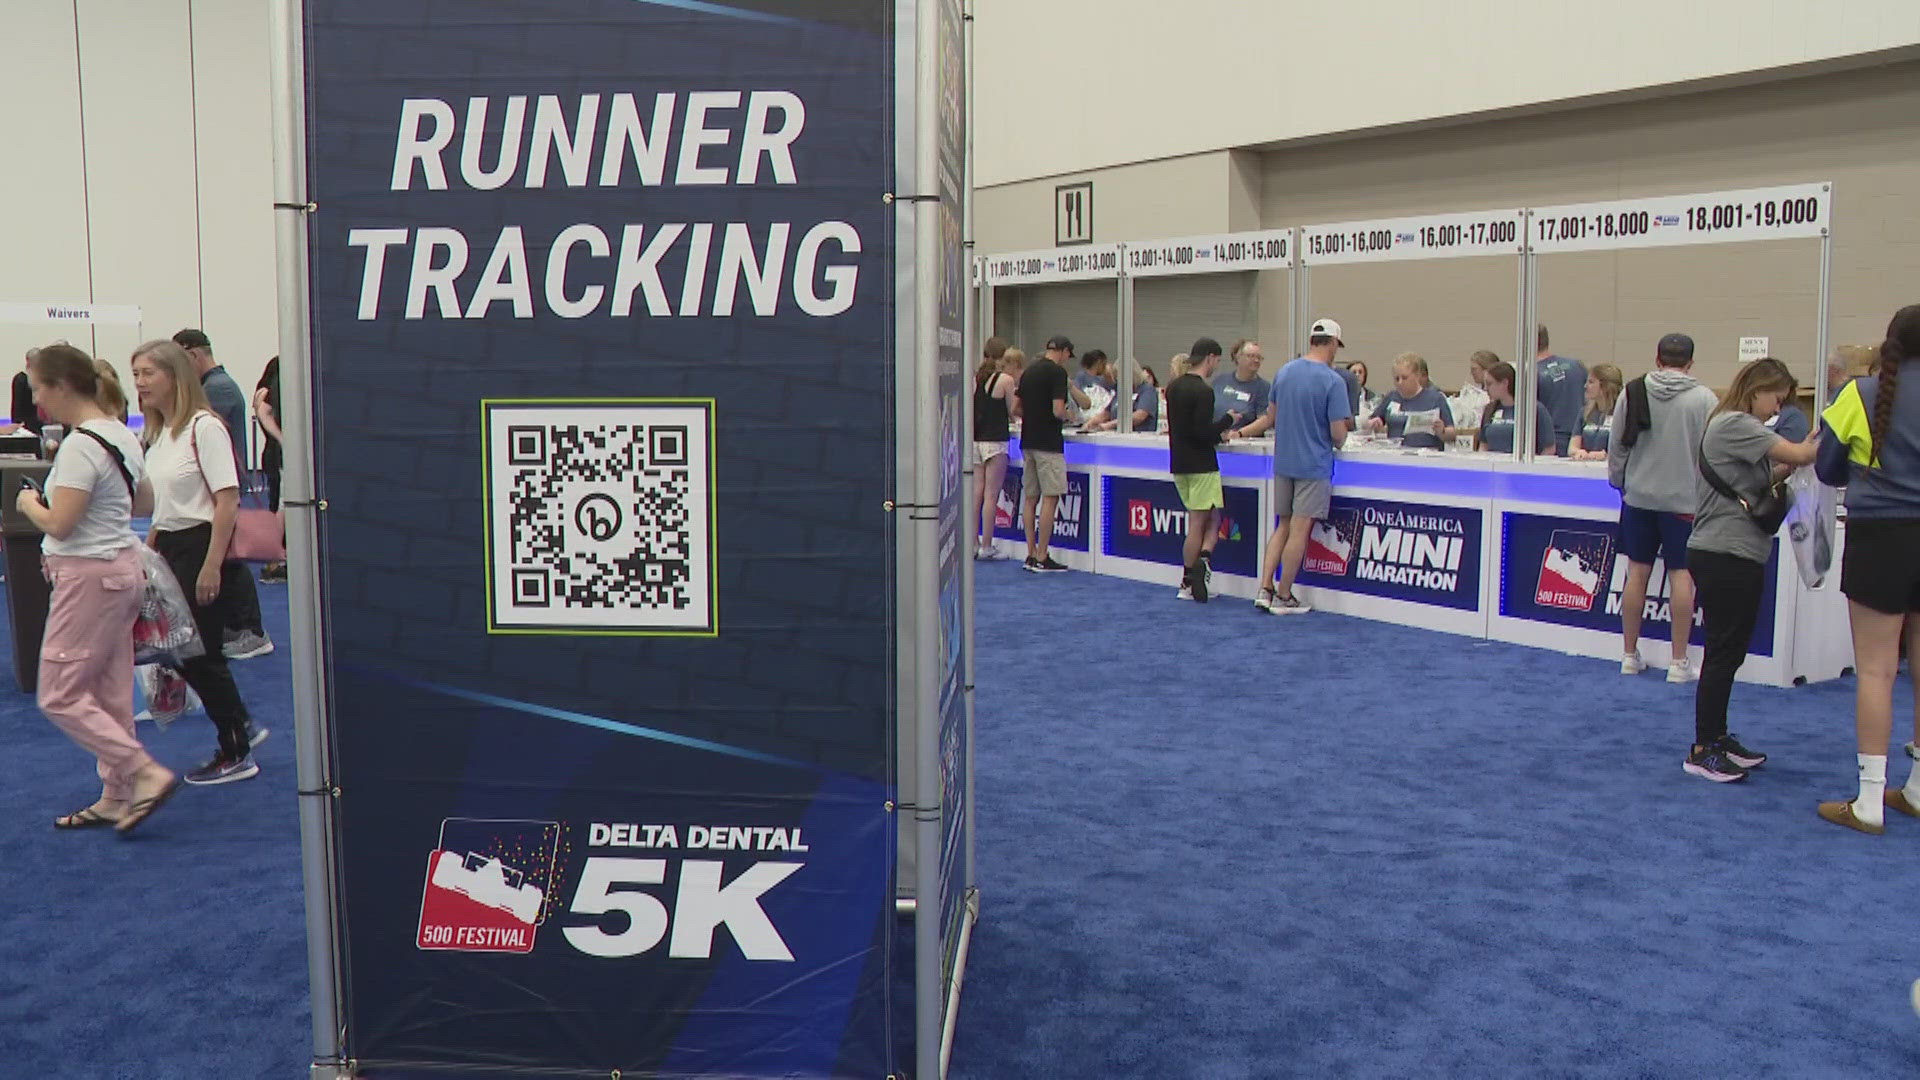 The 500 Festival says they have 20,000 runners from 15 different countries and 5 continents participating this weekend.